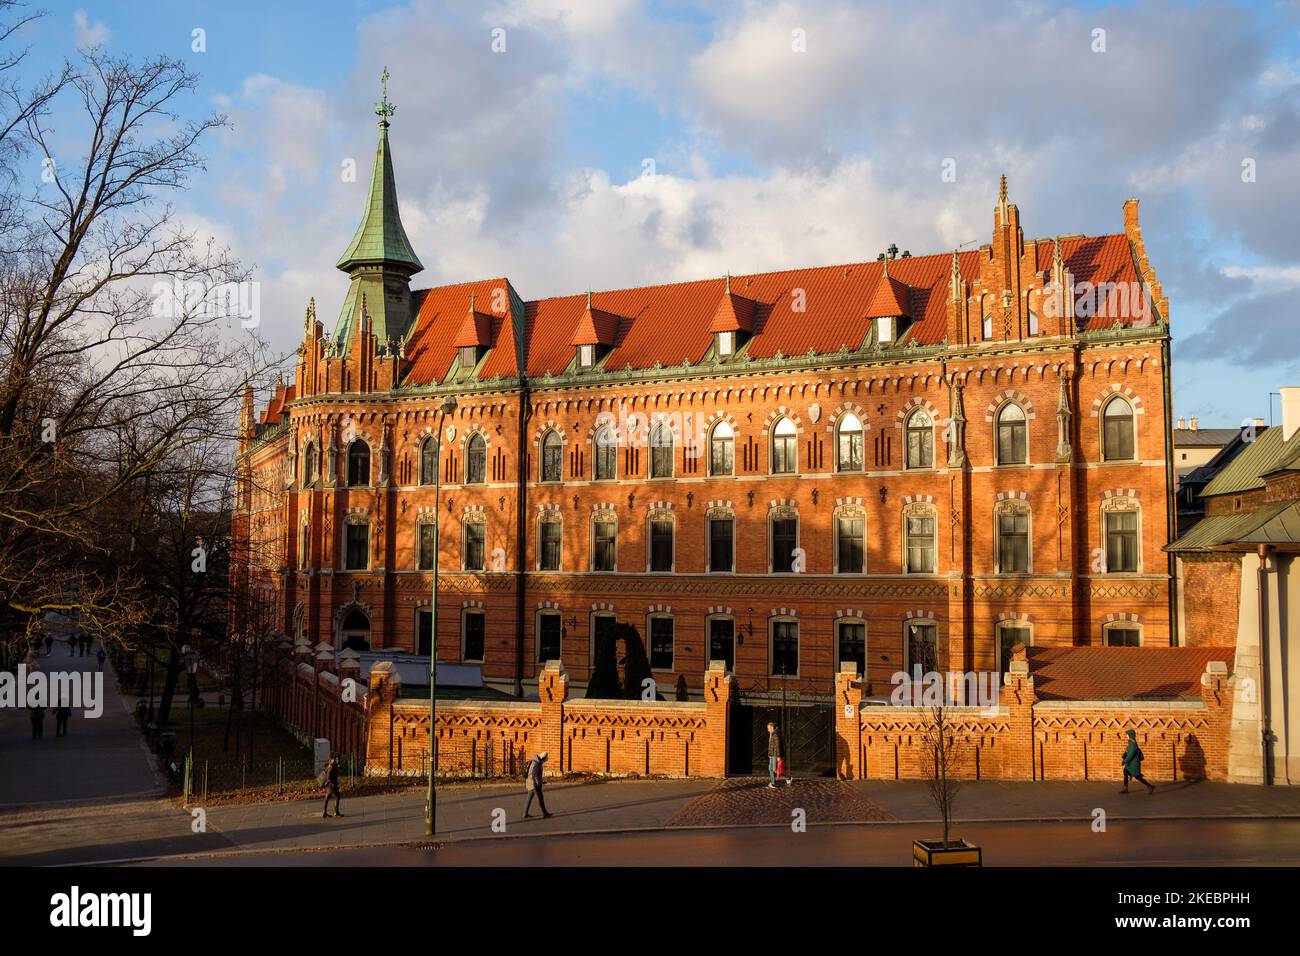 Krakow Poland - an old building highlighted by sunset Stock Photo